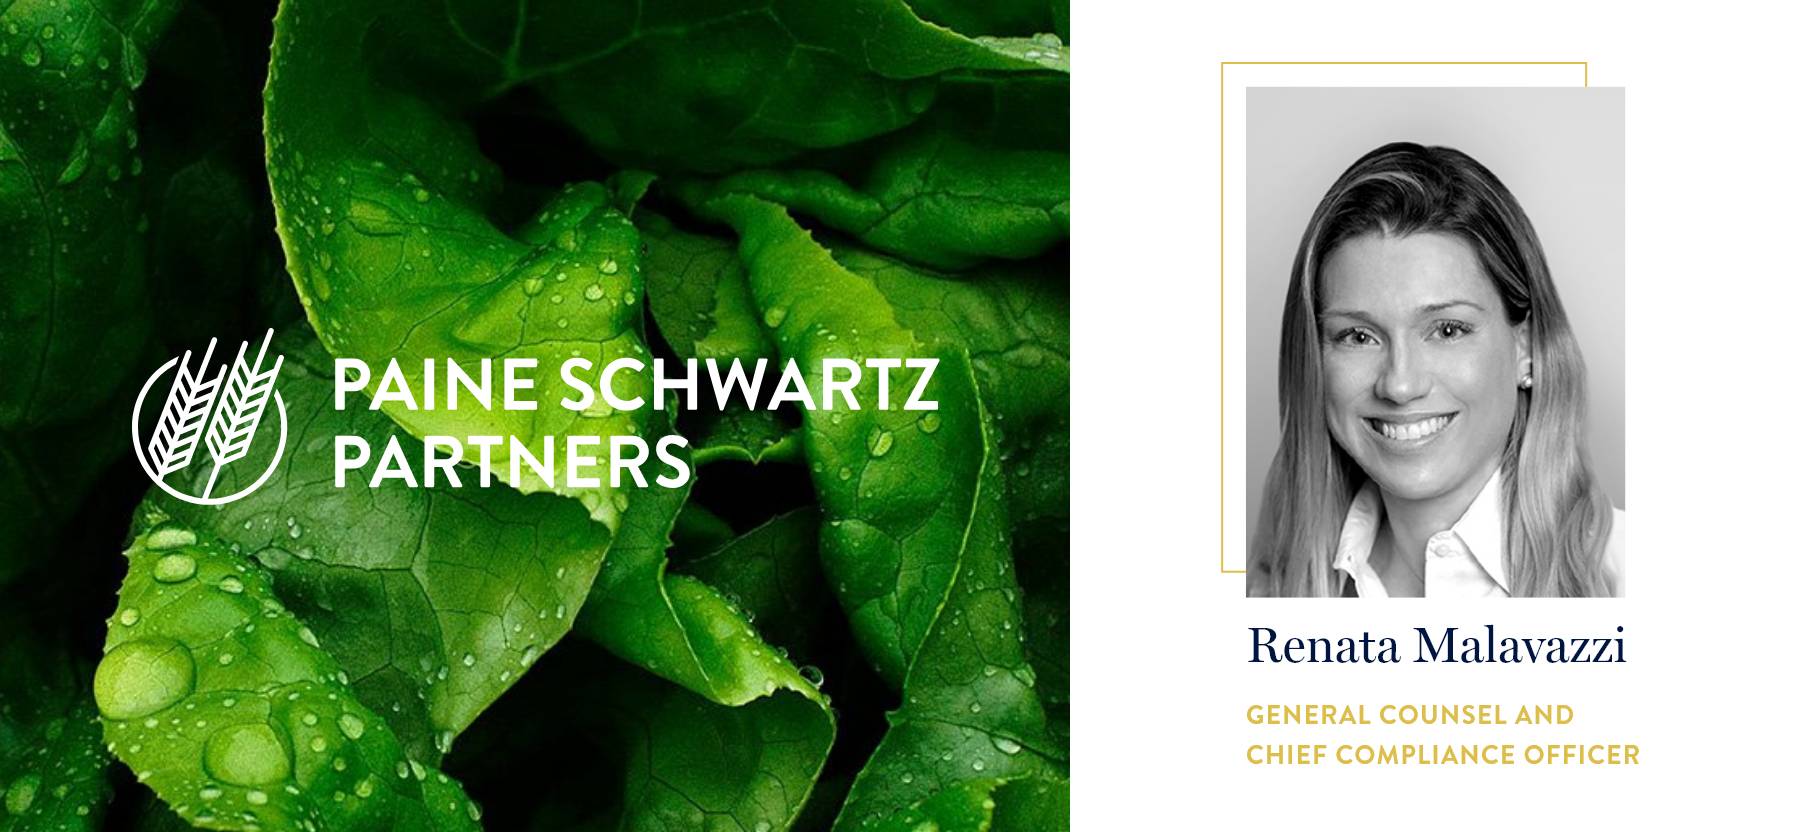 Paine Schwartz Partners Appoints Renata Malavazzi as General Counsel and Chief Compliance Officer@2x